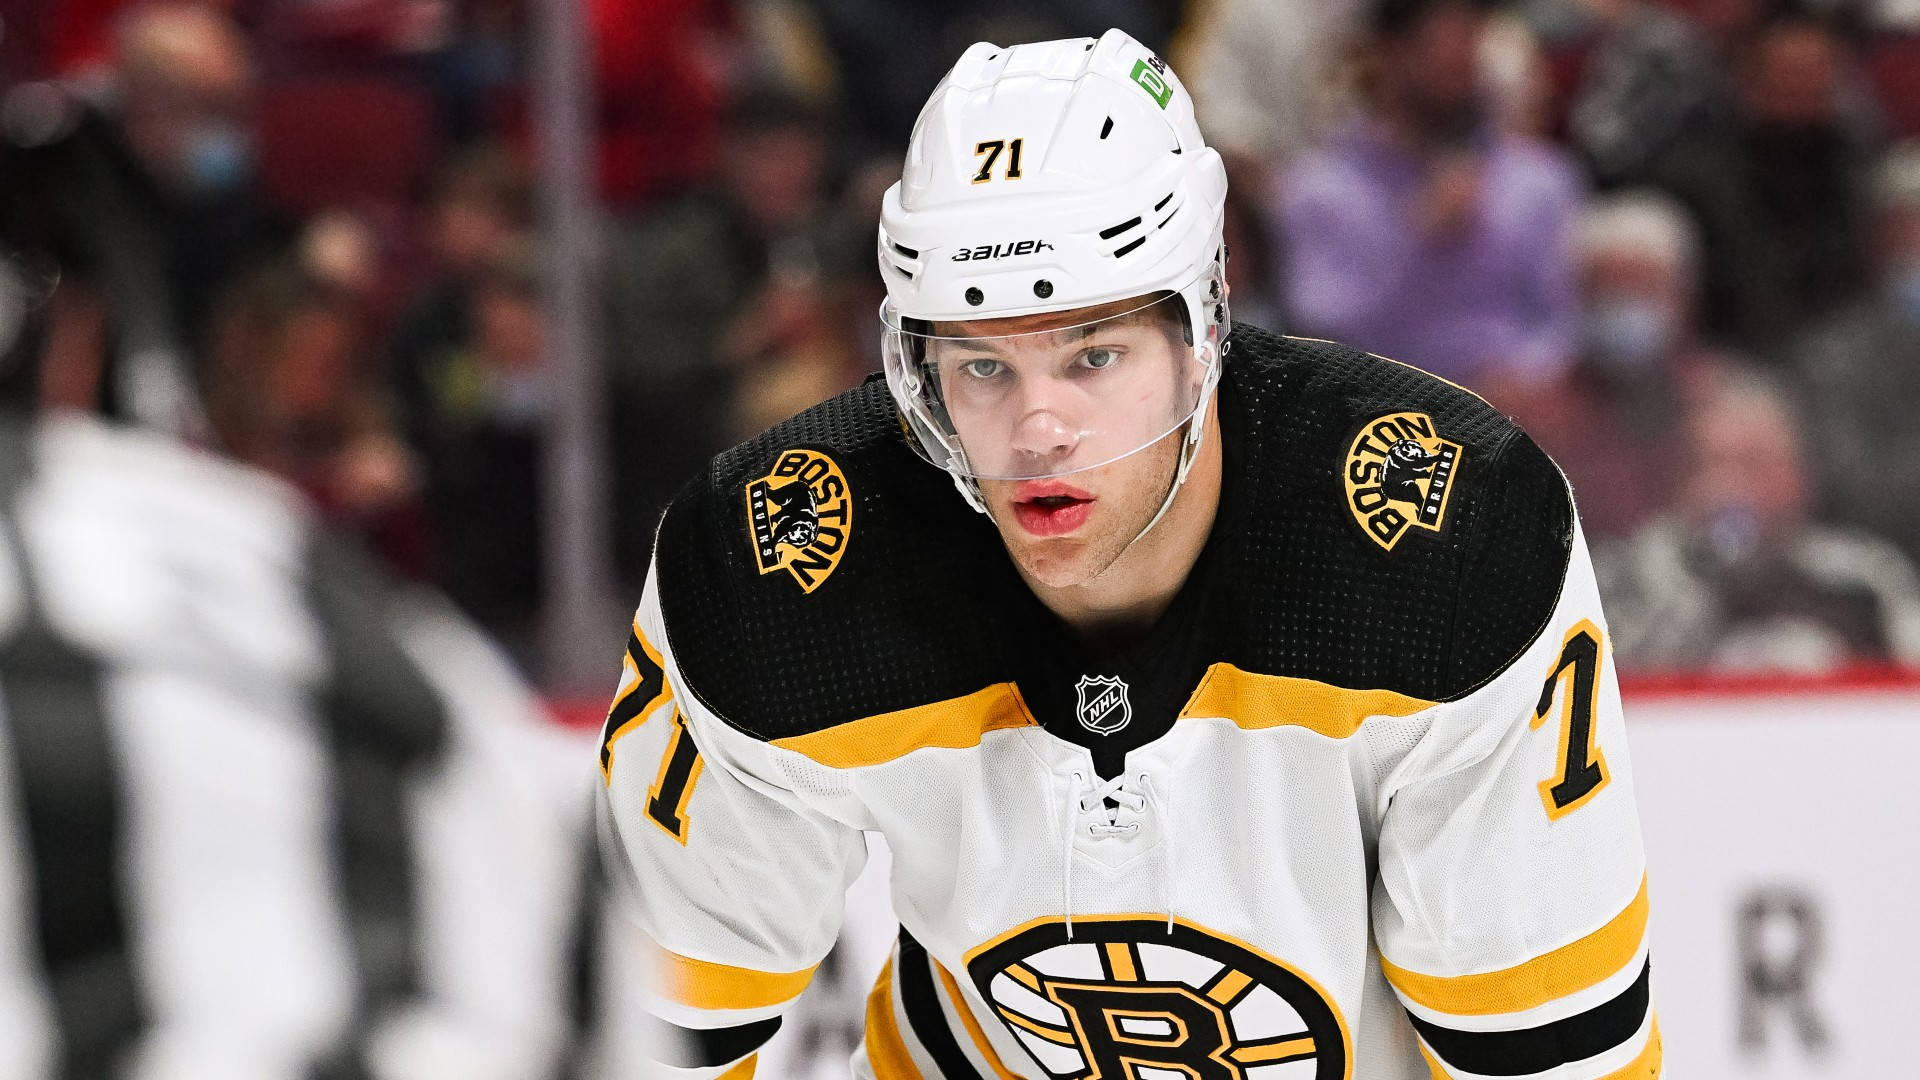 Download Boston Bruins iconic player, Taylor Hall in action. Wallpaper